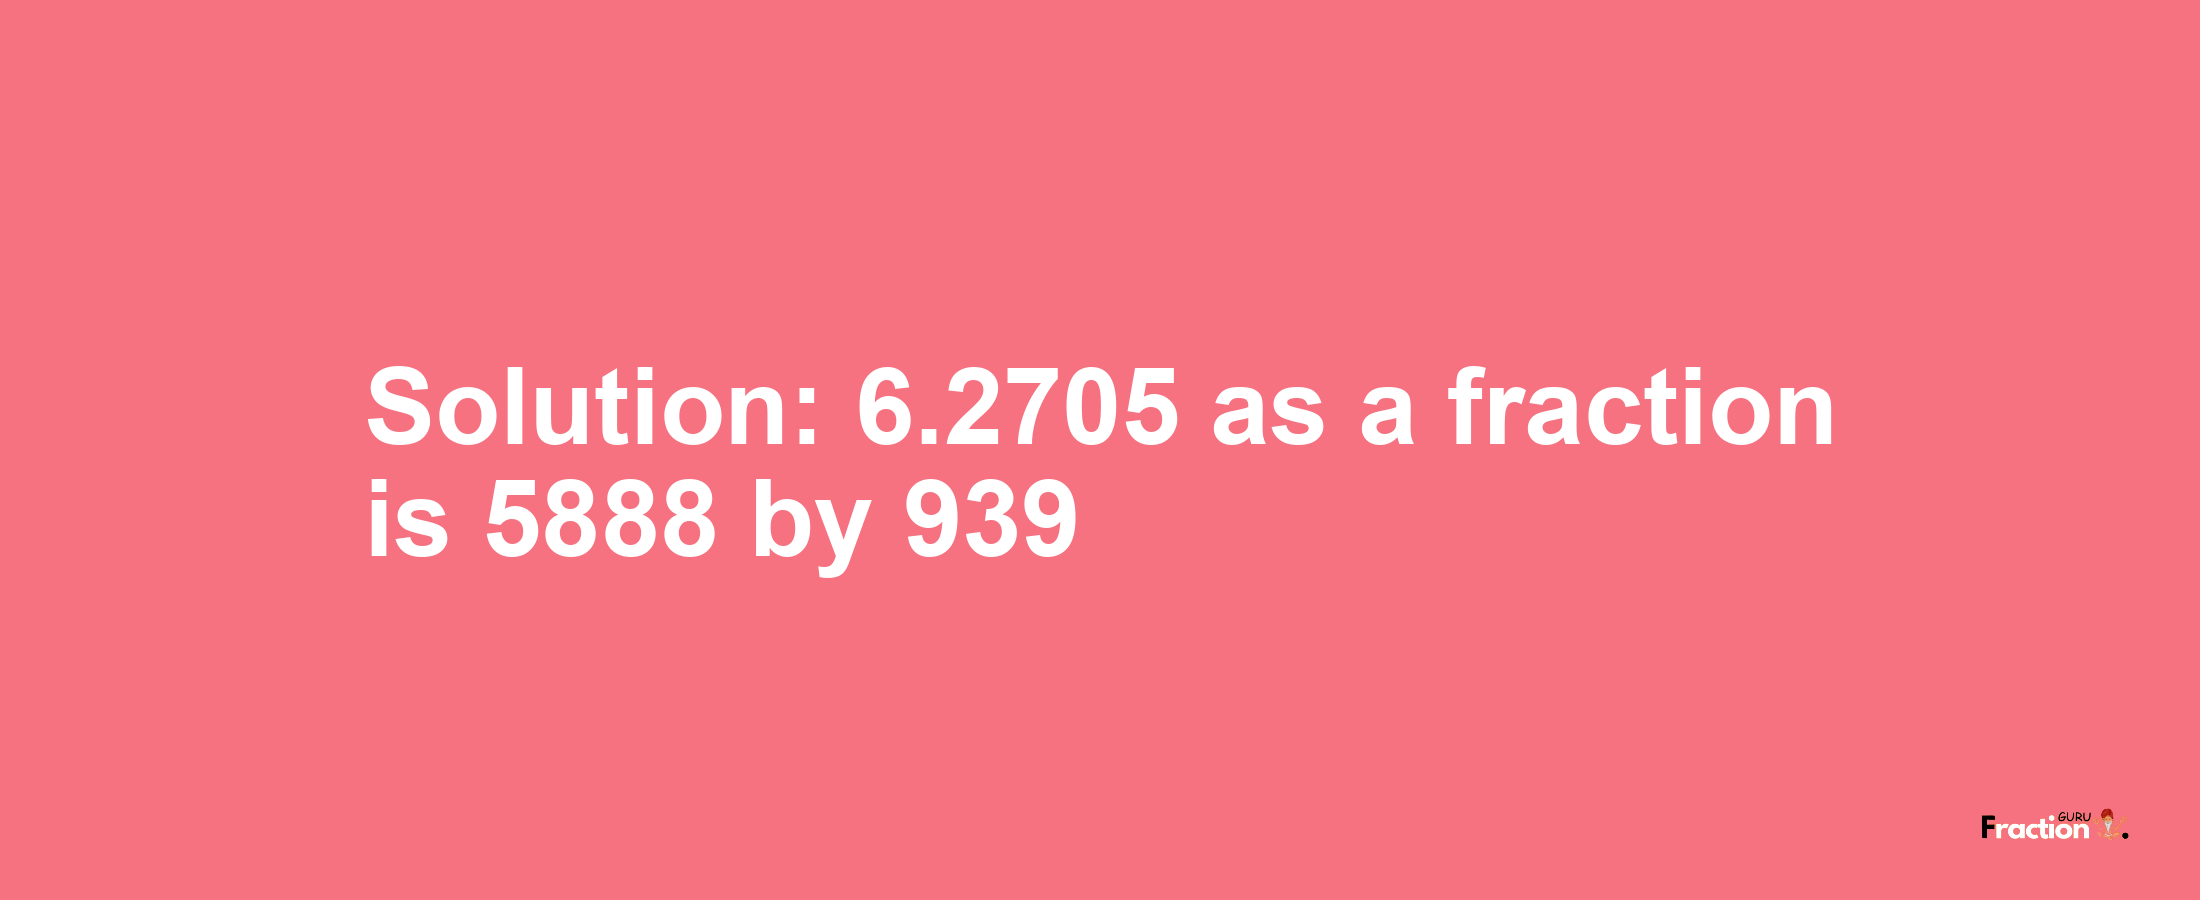 Solution:6.2705 as a fraction is 5888/939